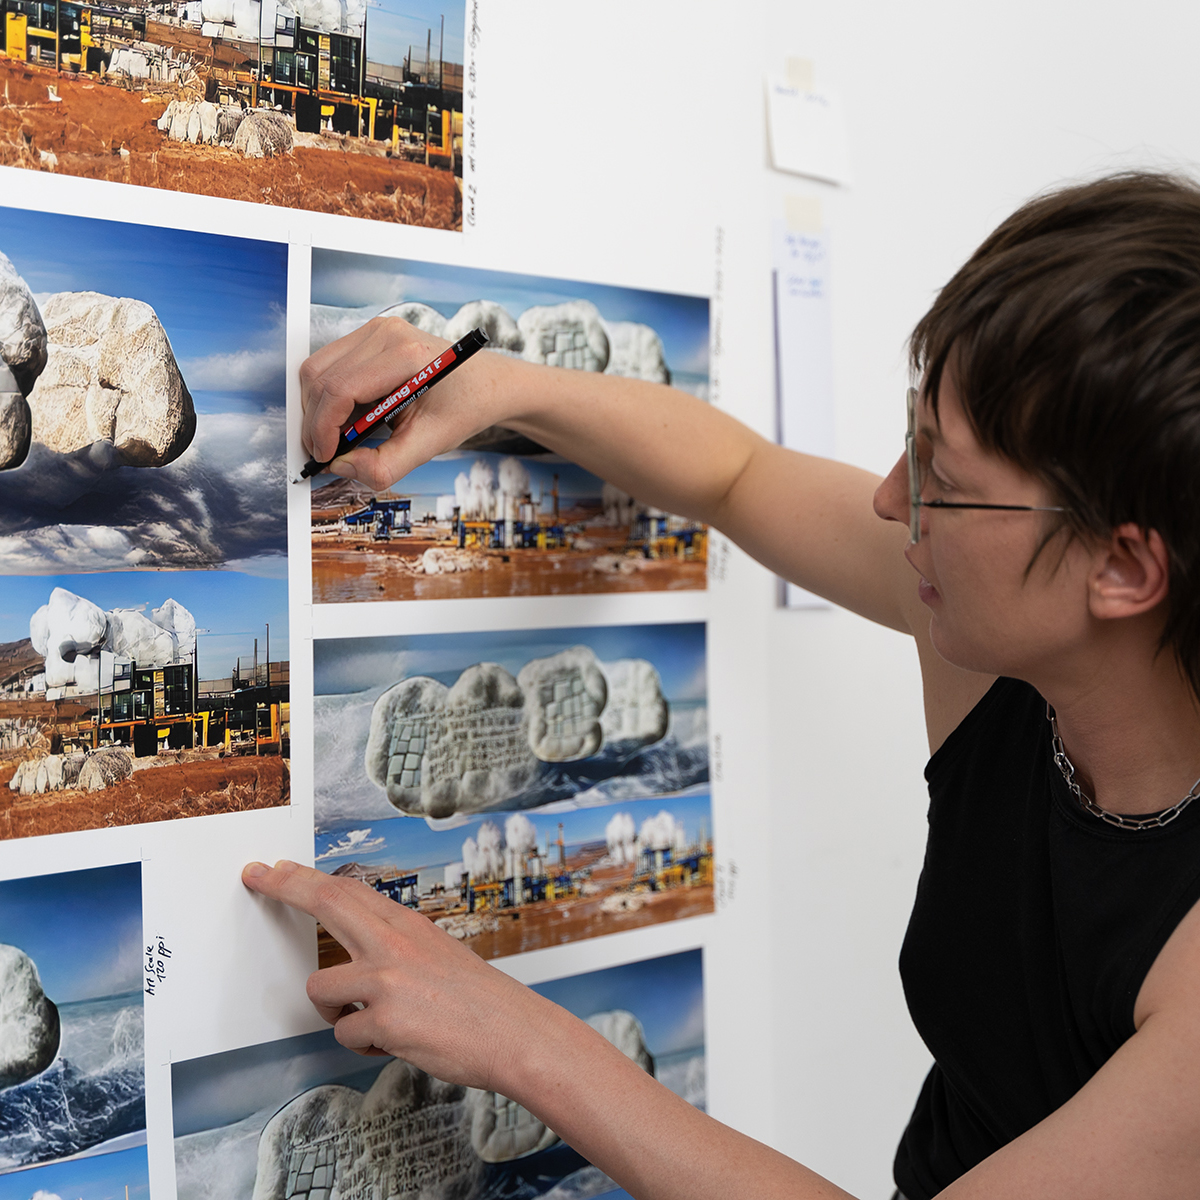 A woman making notes on images on a wall